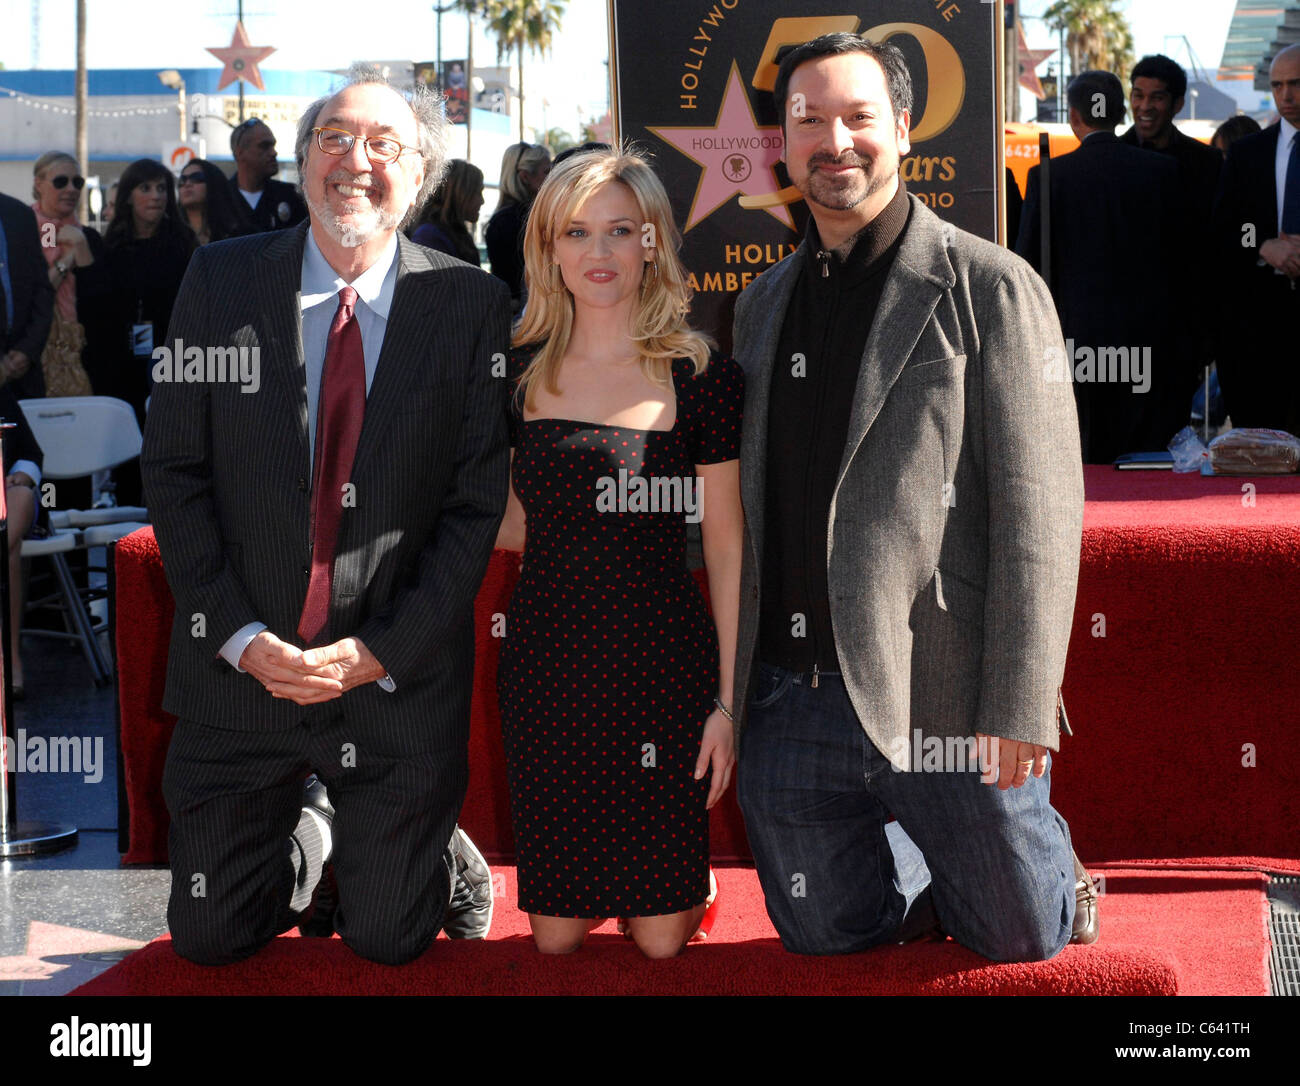 James L. Brooks, Reese Witherspoon, Jim Mangold at the induction ceremony for Star on the Hollywood Walk of Fame Ceremony for Reese Witherspoon, Hollywood Boulevard, Los Angeles, CA December 1, 2010. Photo By: Elizabeth Goodenough/Everett Collection Stock Photo